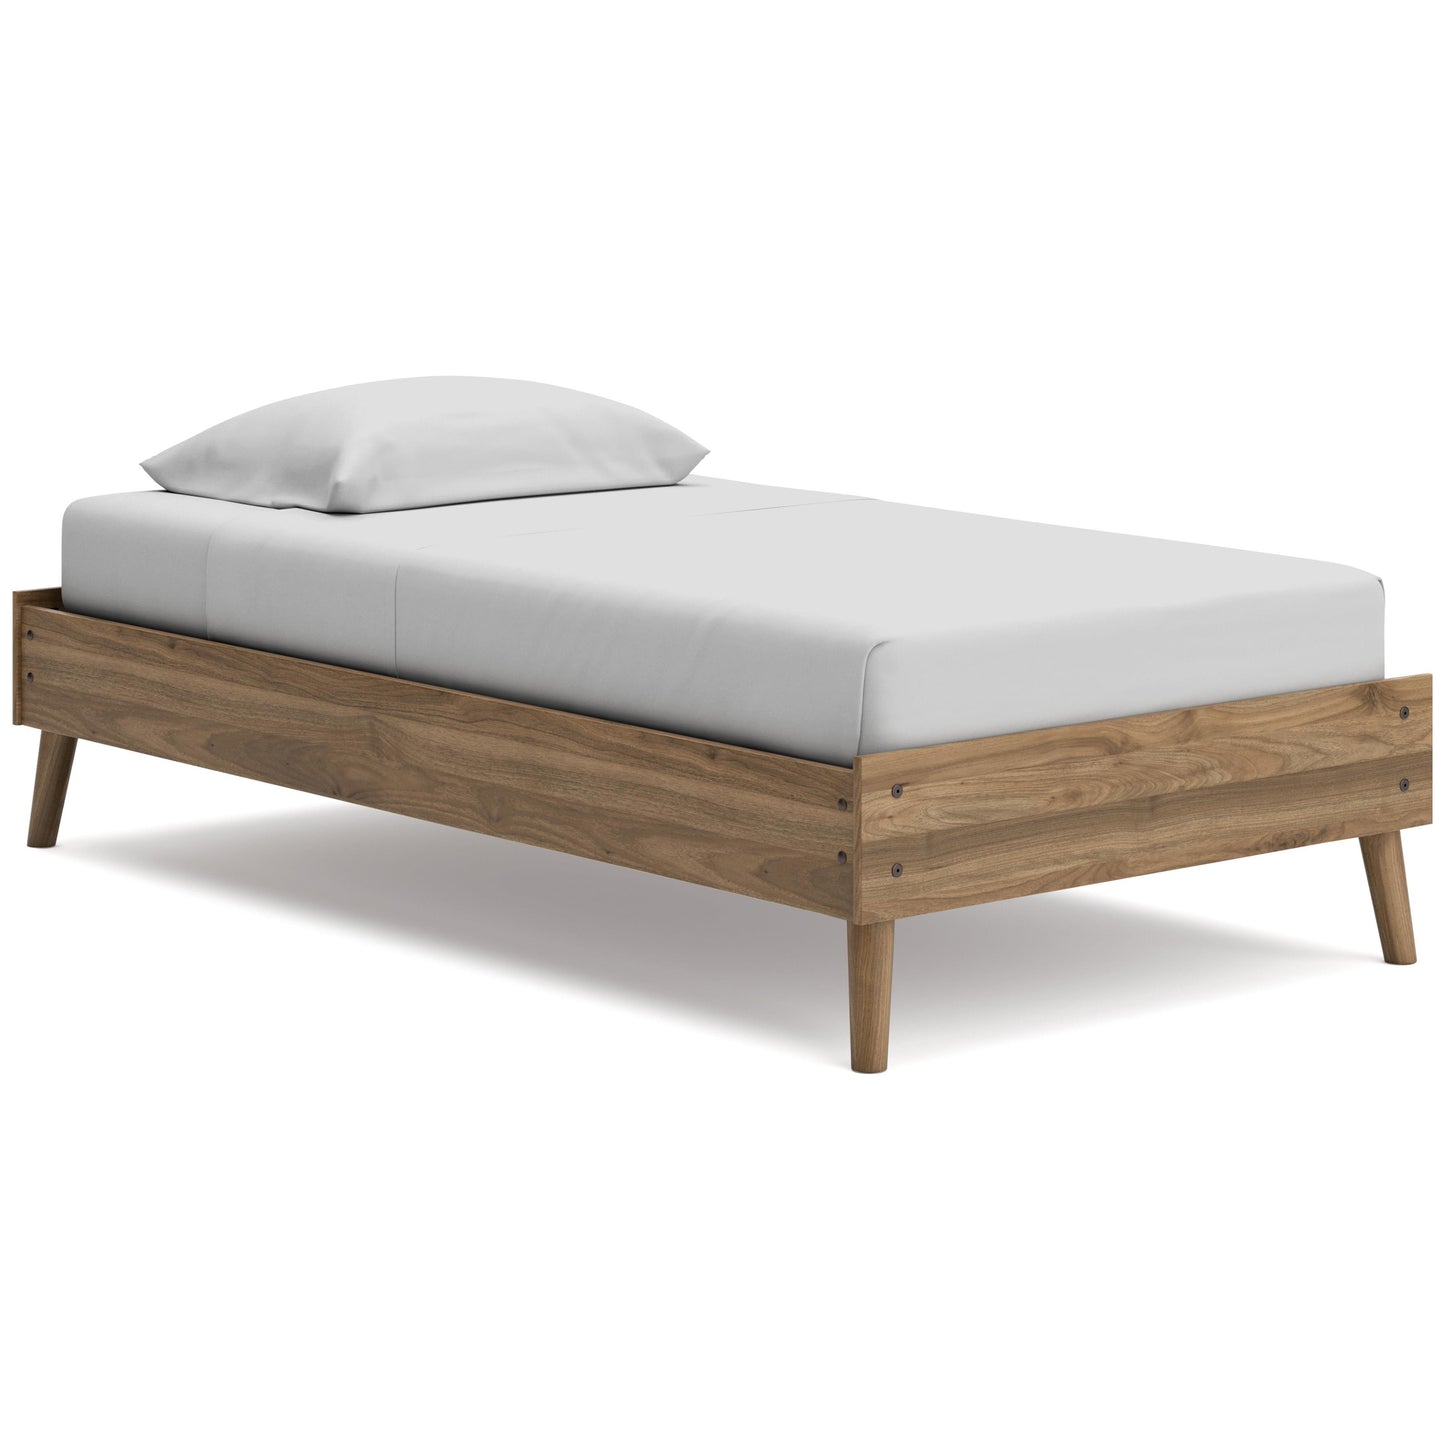 Signature Design by Ashley Kids Beds Bed EB1187-111 IMAGE 1